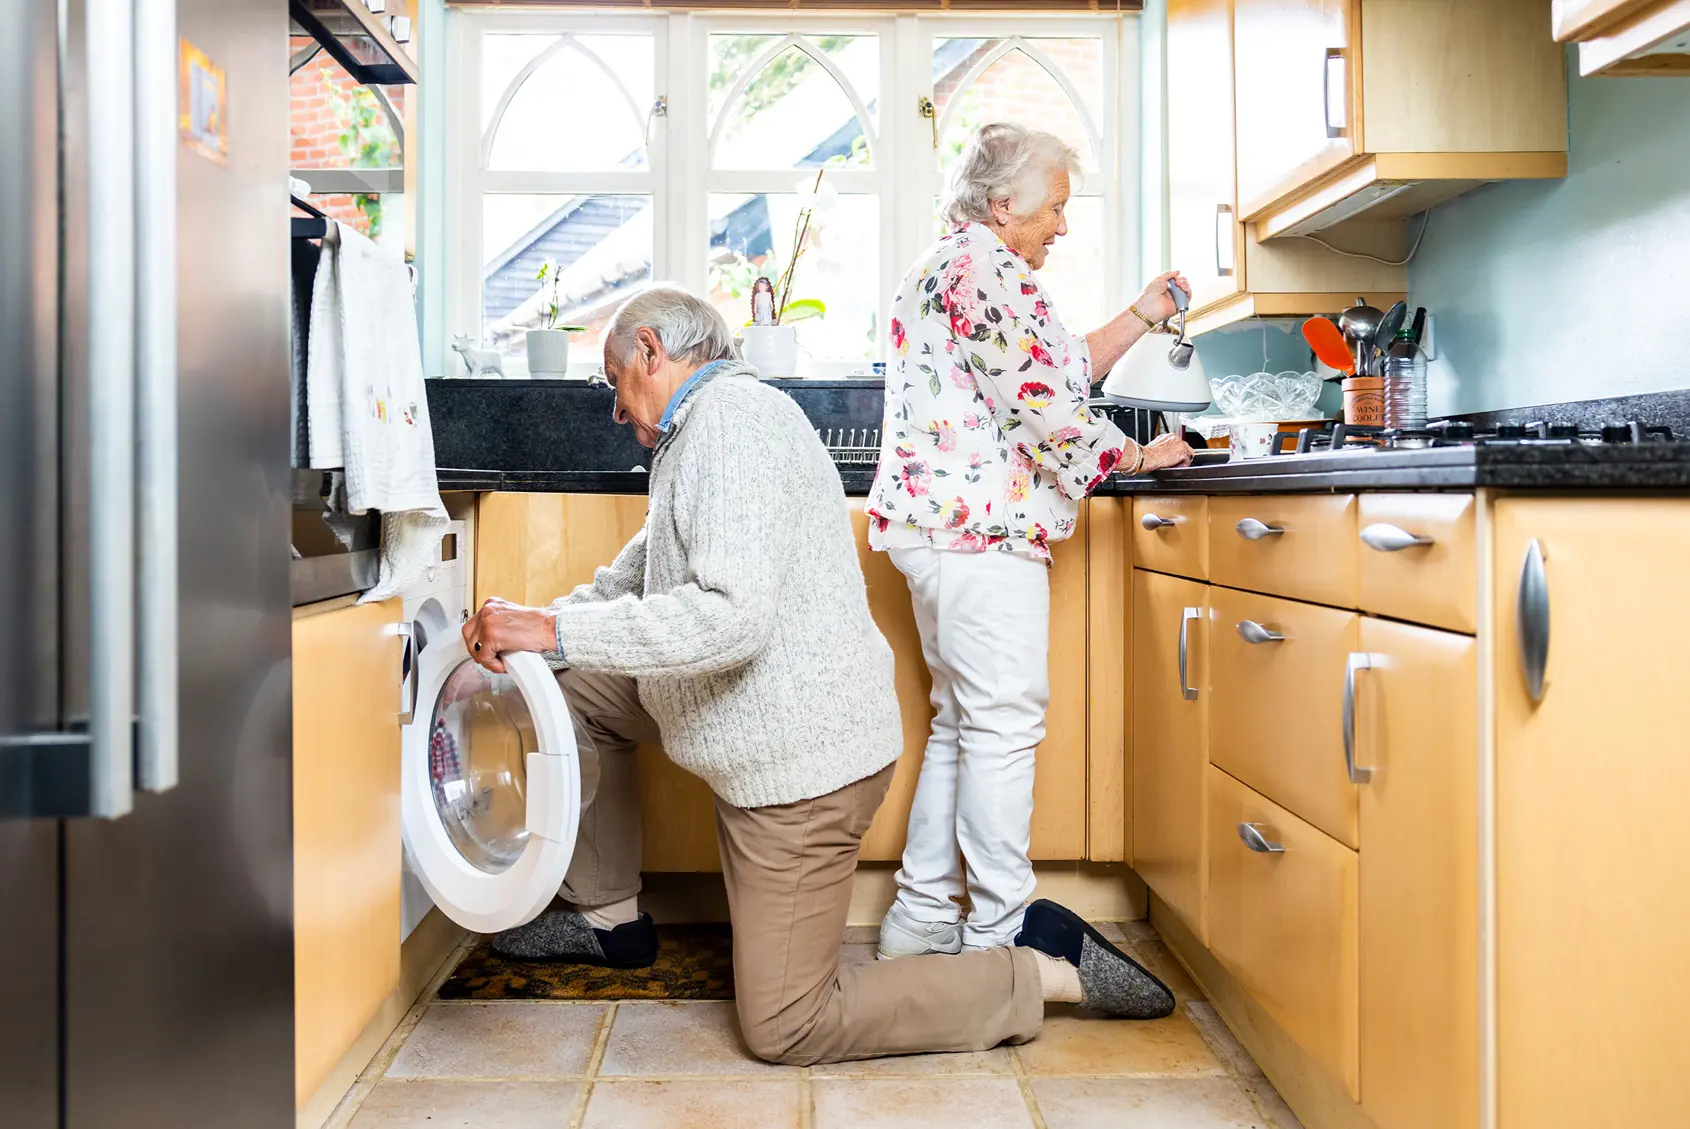 An elderly couple in their kitchen, one prepares food while the other puts a towel into the washing machine